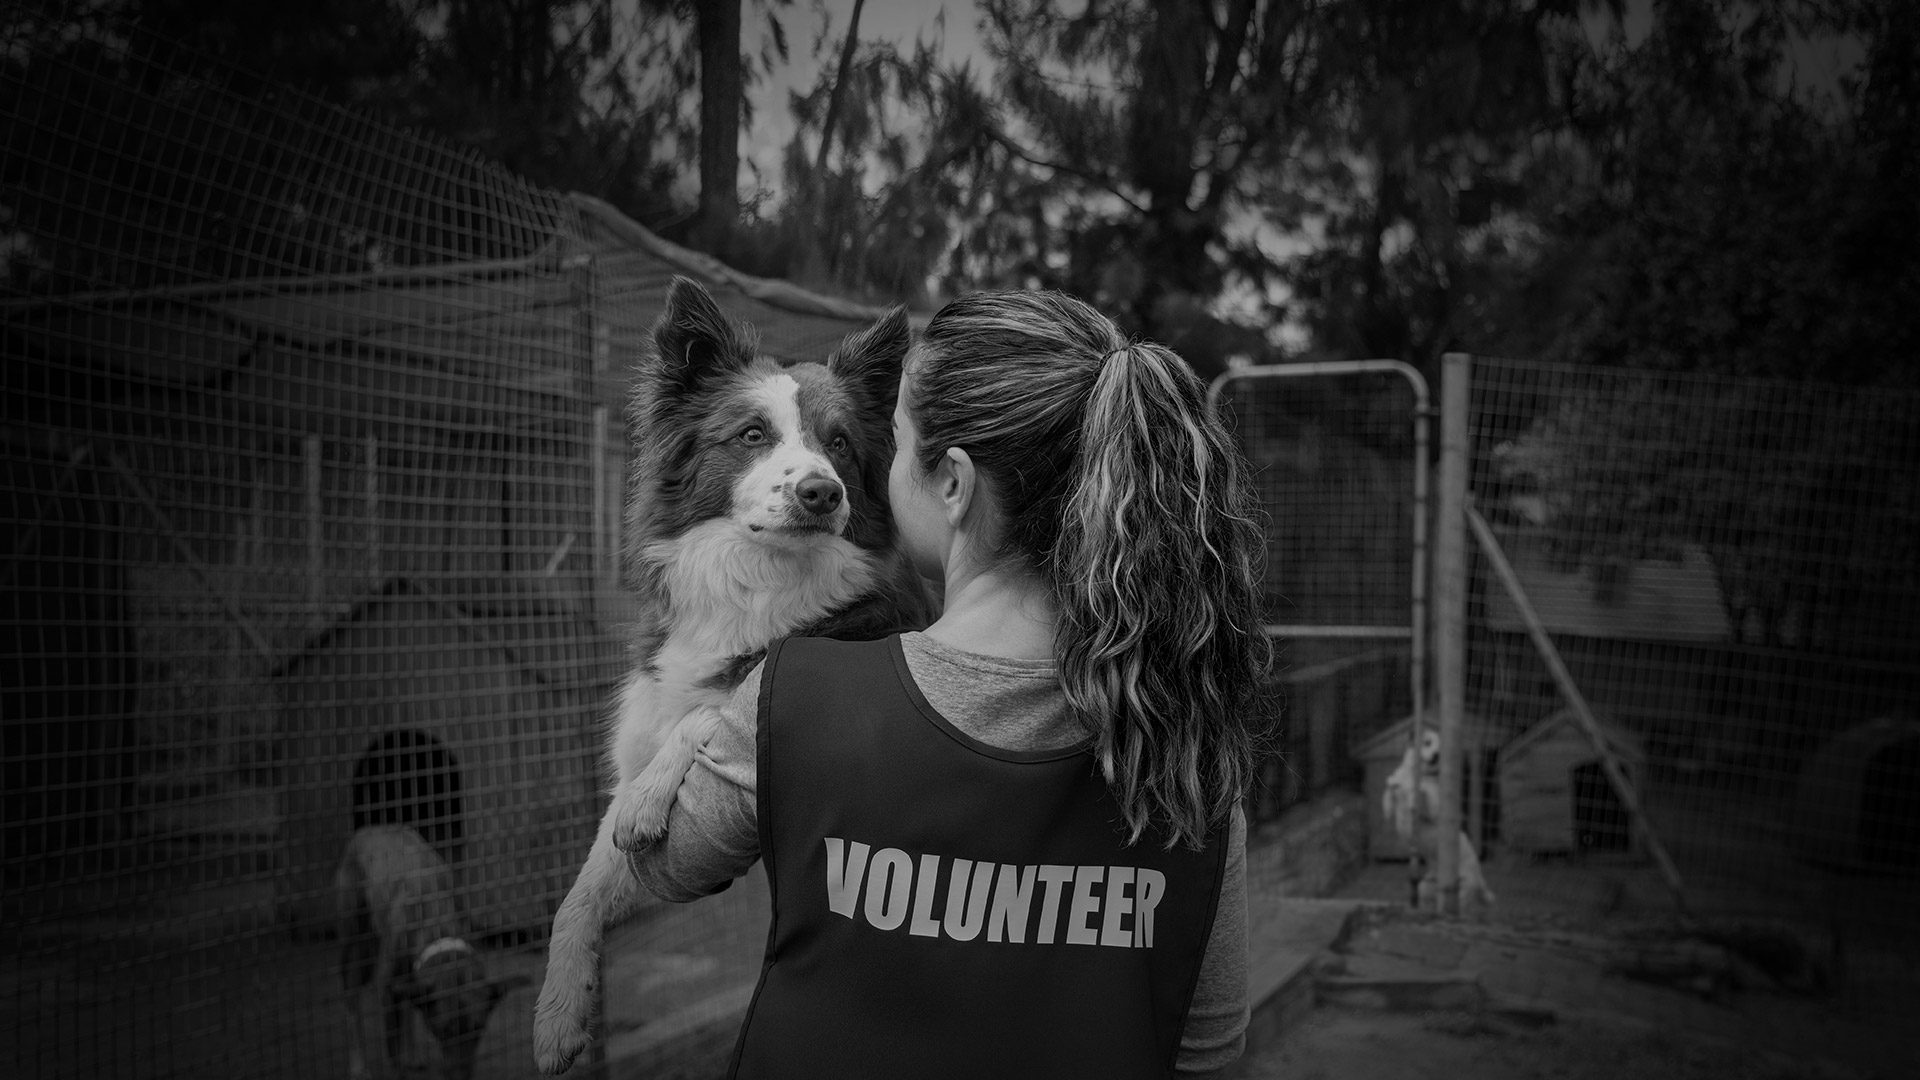 Person volunteering at a shelter holding a dog